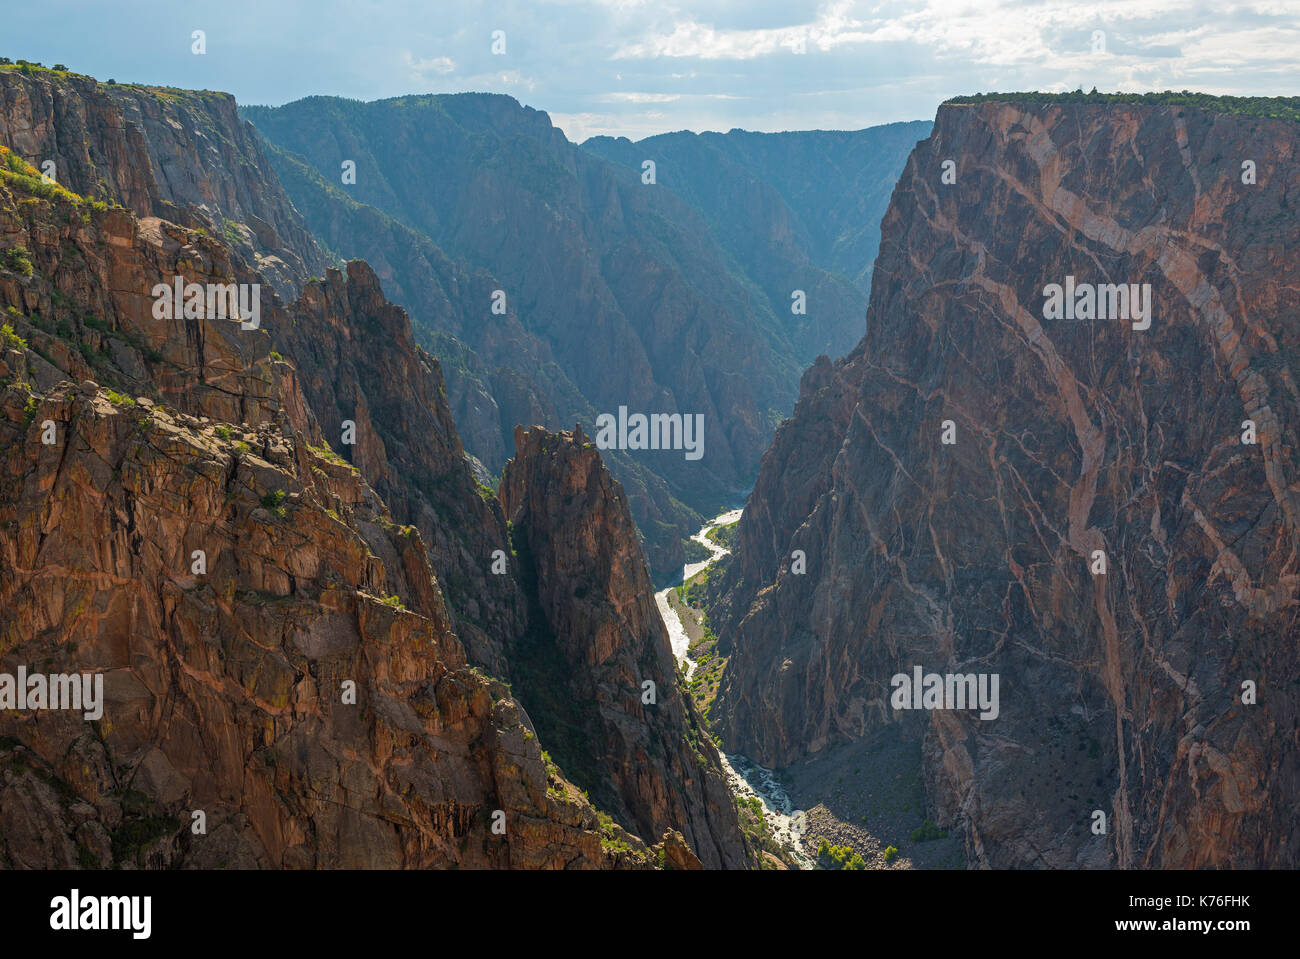 The granite cliffs of the Black Canyon of the Gunnison with the two dragons and the mysterious Gunnison River cutting through the rock, Colorado, USA. Stock Photo